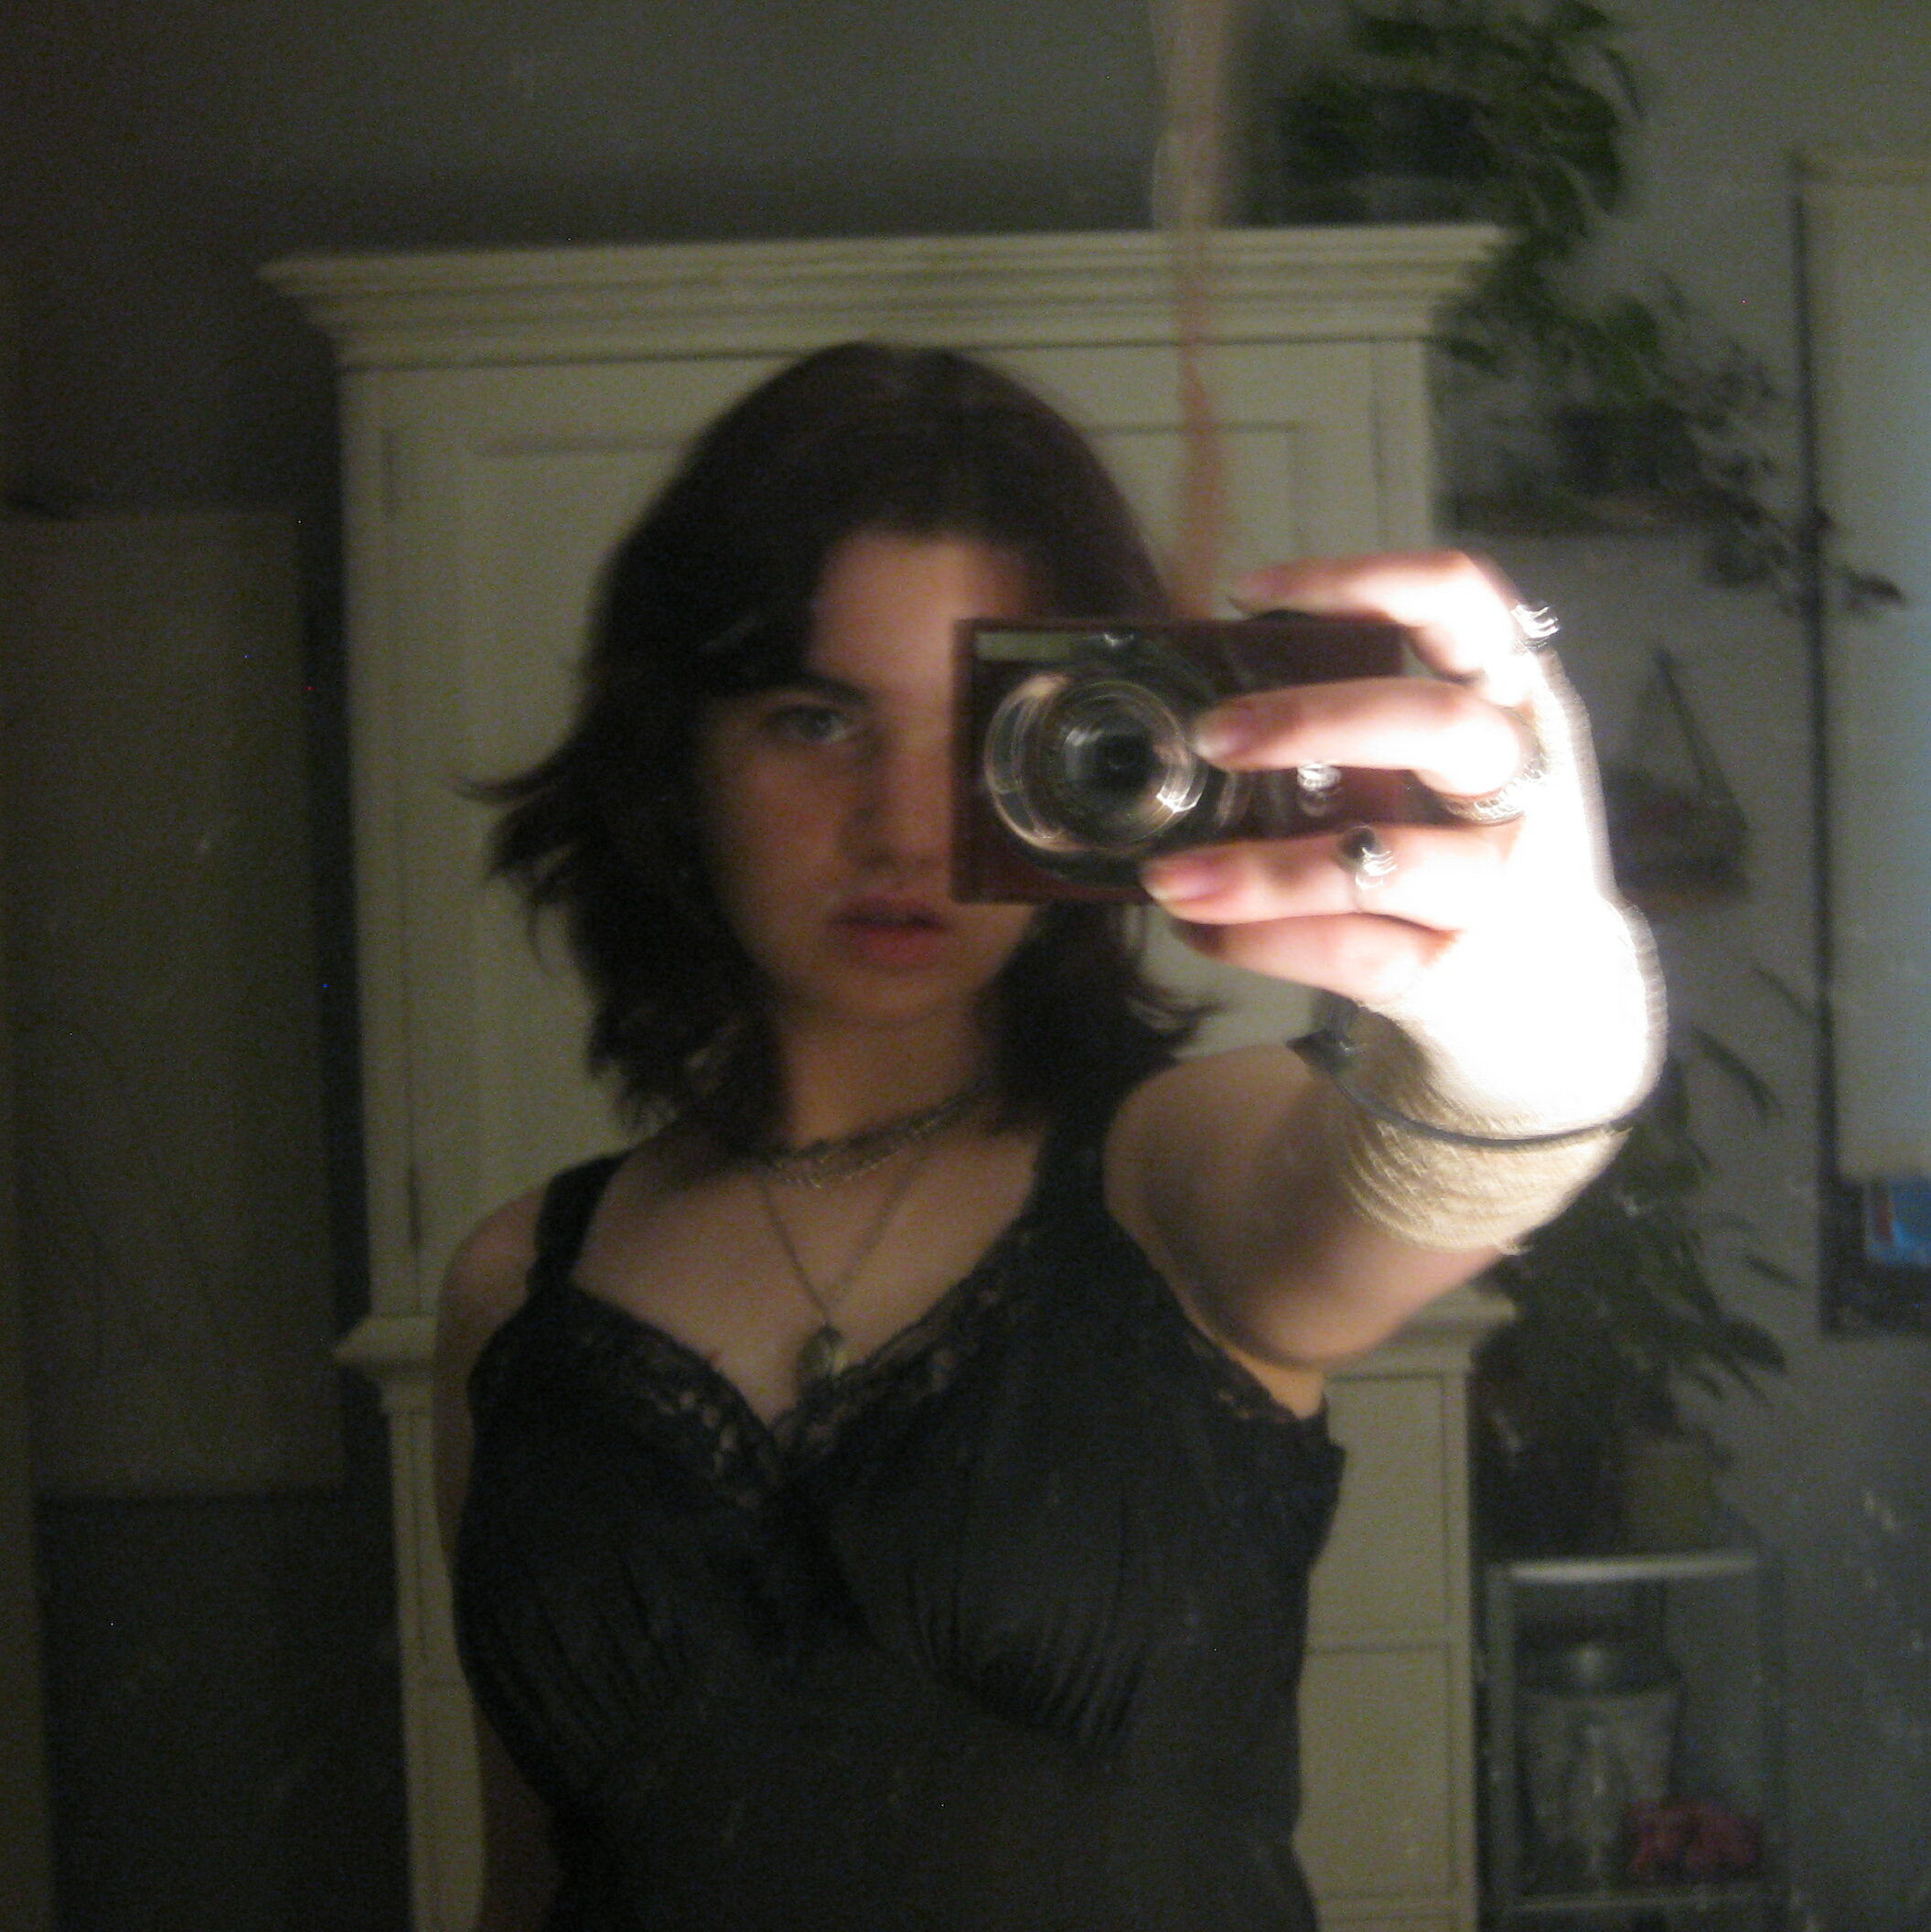 A mirror picture of me taken with an old digital camera